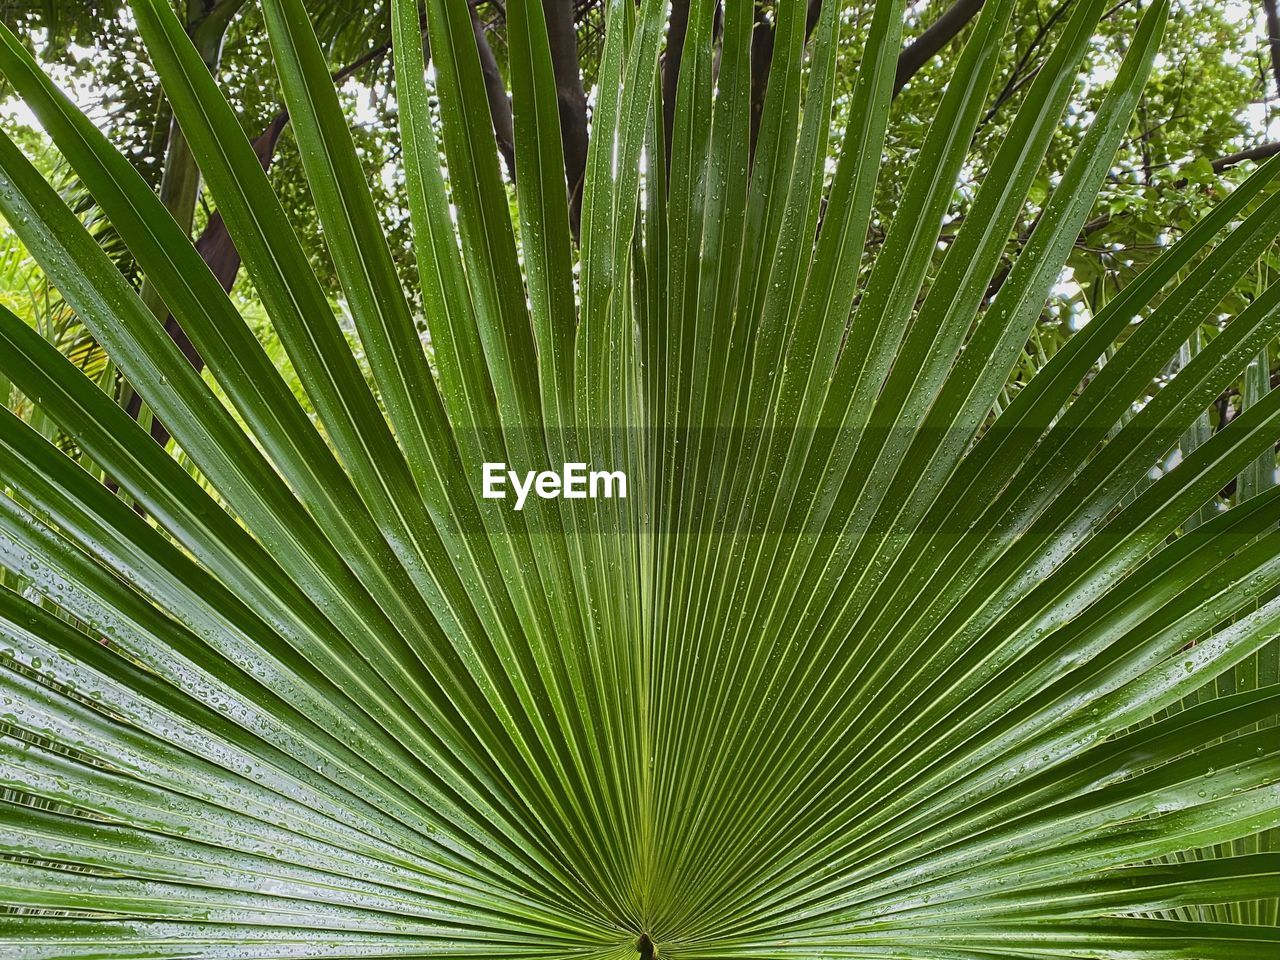 leaf, green, plant, plant part, tree, palm leaf, beauty in nature, tropical climate, growth, palm tree, nature, backgrounds, saw palmetto, no people, full frame, close-up, flower, pattern, sunlight, freshness, frond, outdoors, day, botany, lush foliage, foliage, rainforest, branch, plant stem, forest, environment, tranquility